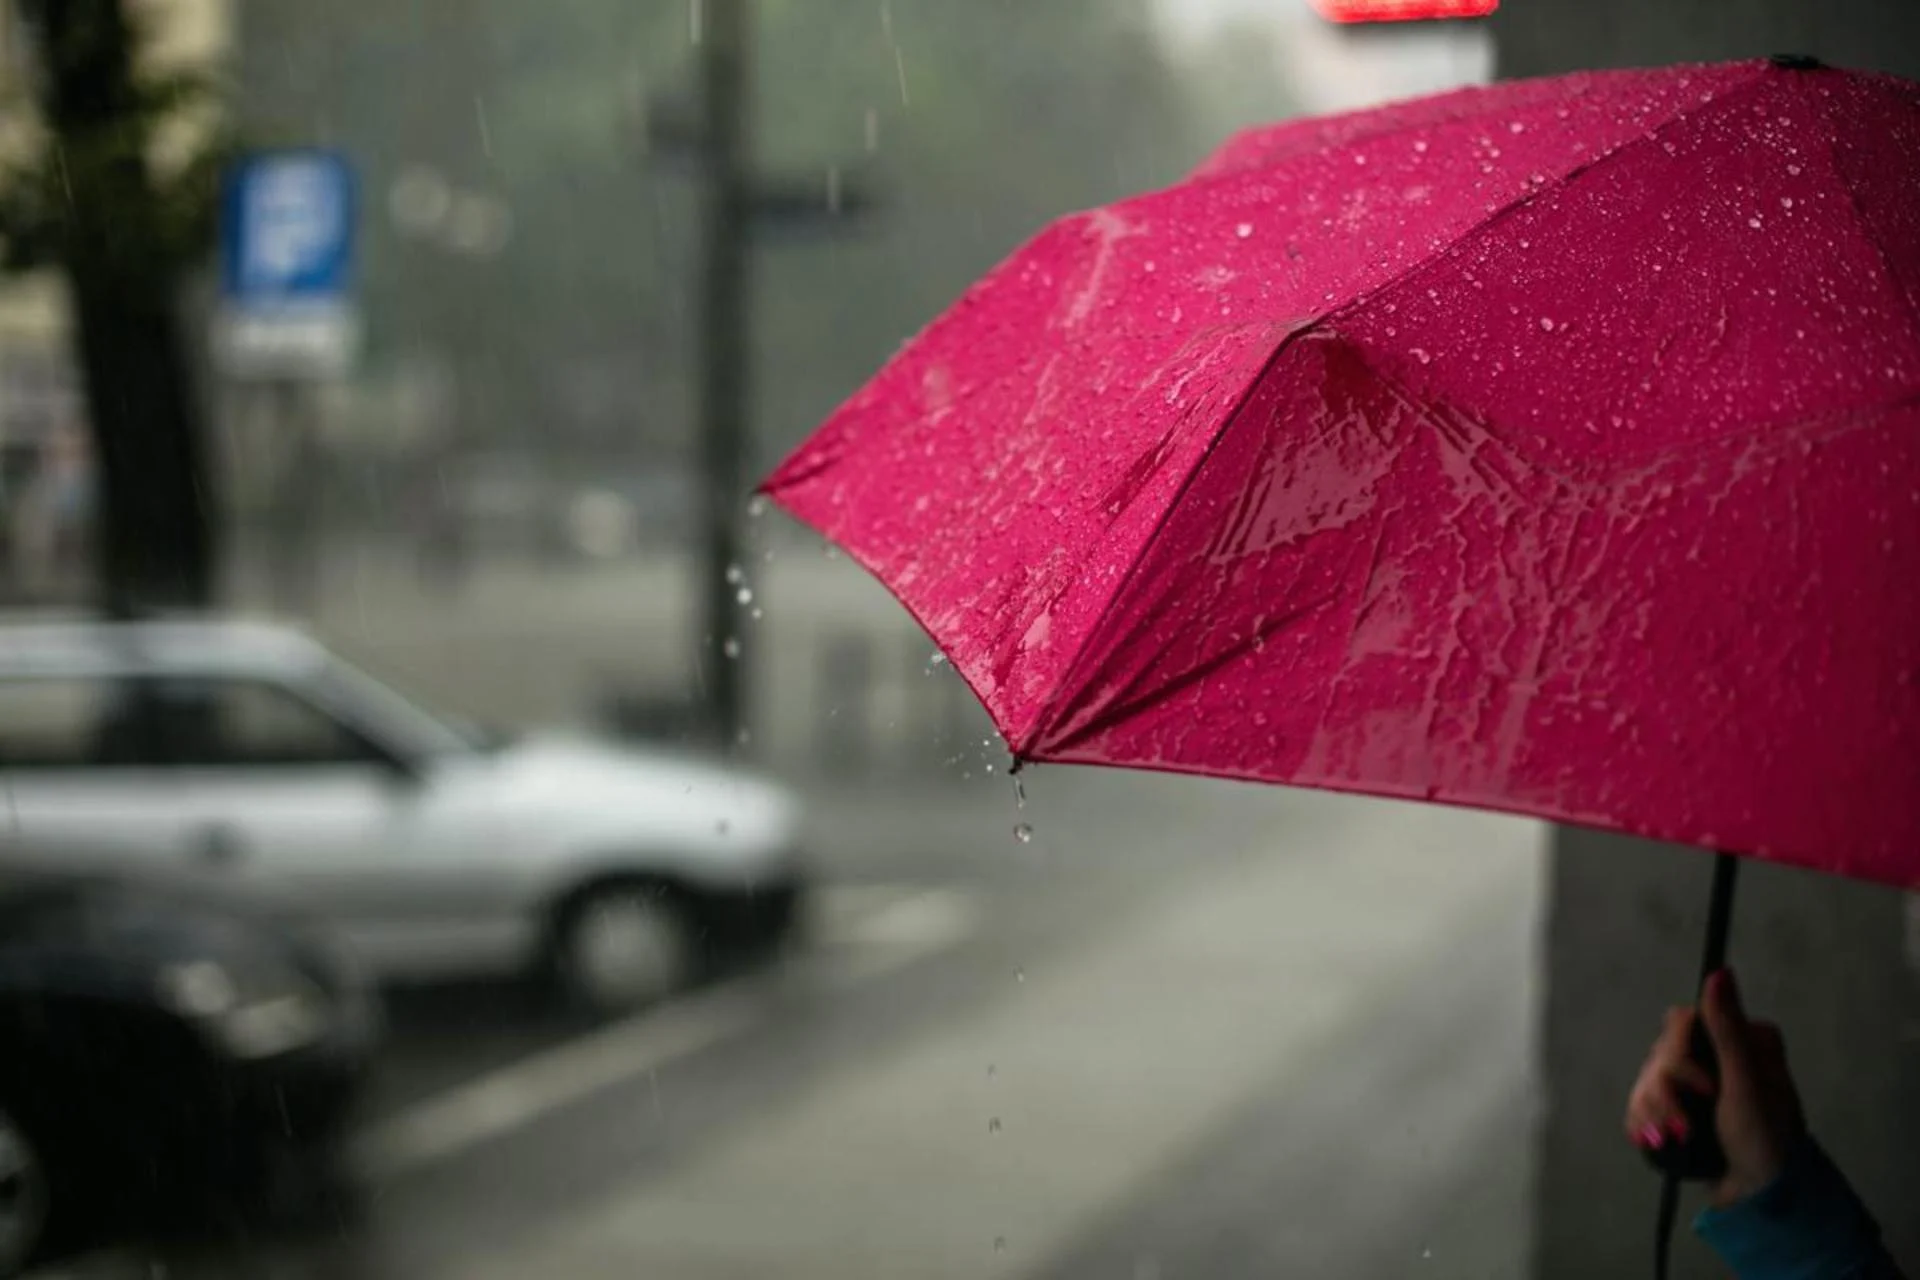 Soggy June start for B.C. but a quick turnaround with heat dome looming